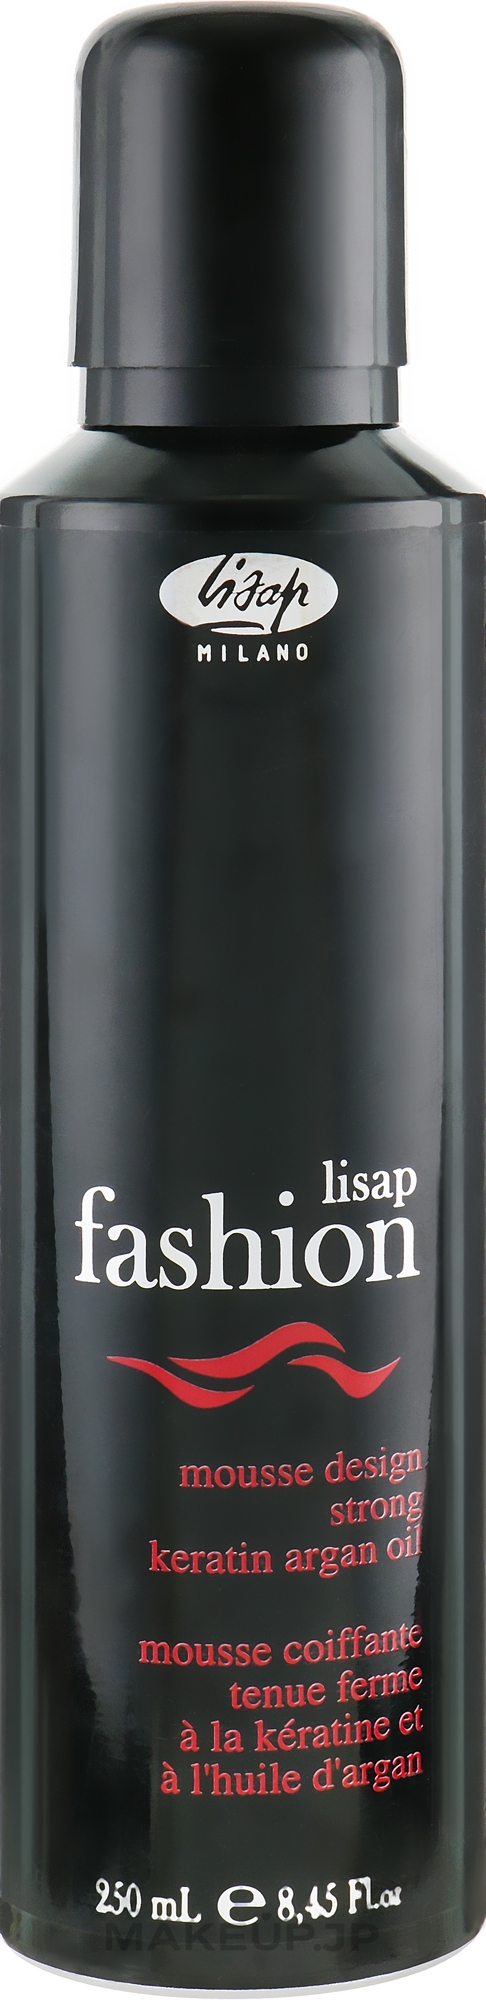 Strong Hold Mousse - Lisap Fashion Extreme Mousse Design Strong — photo 250 ml